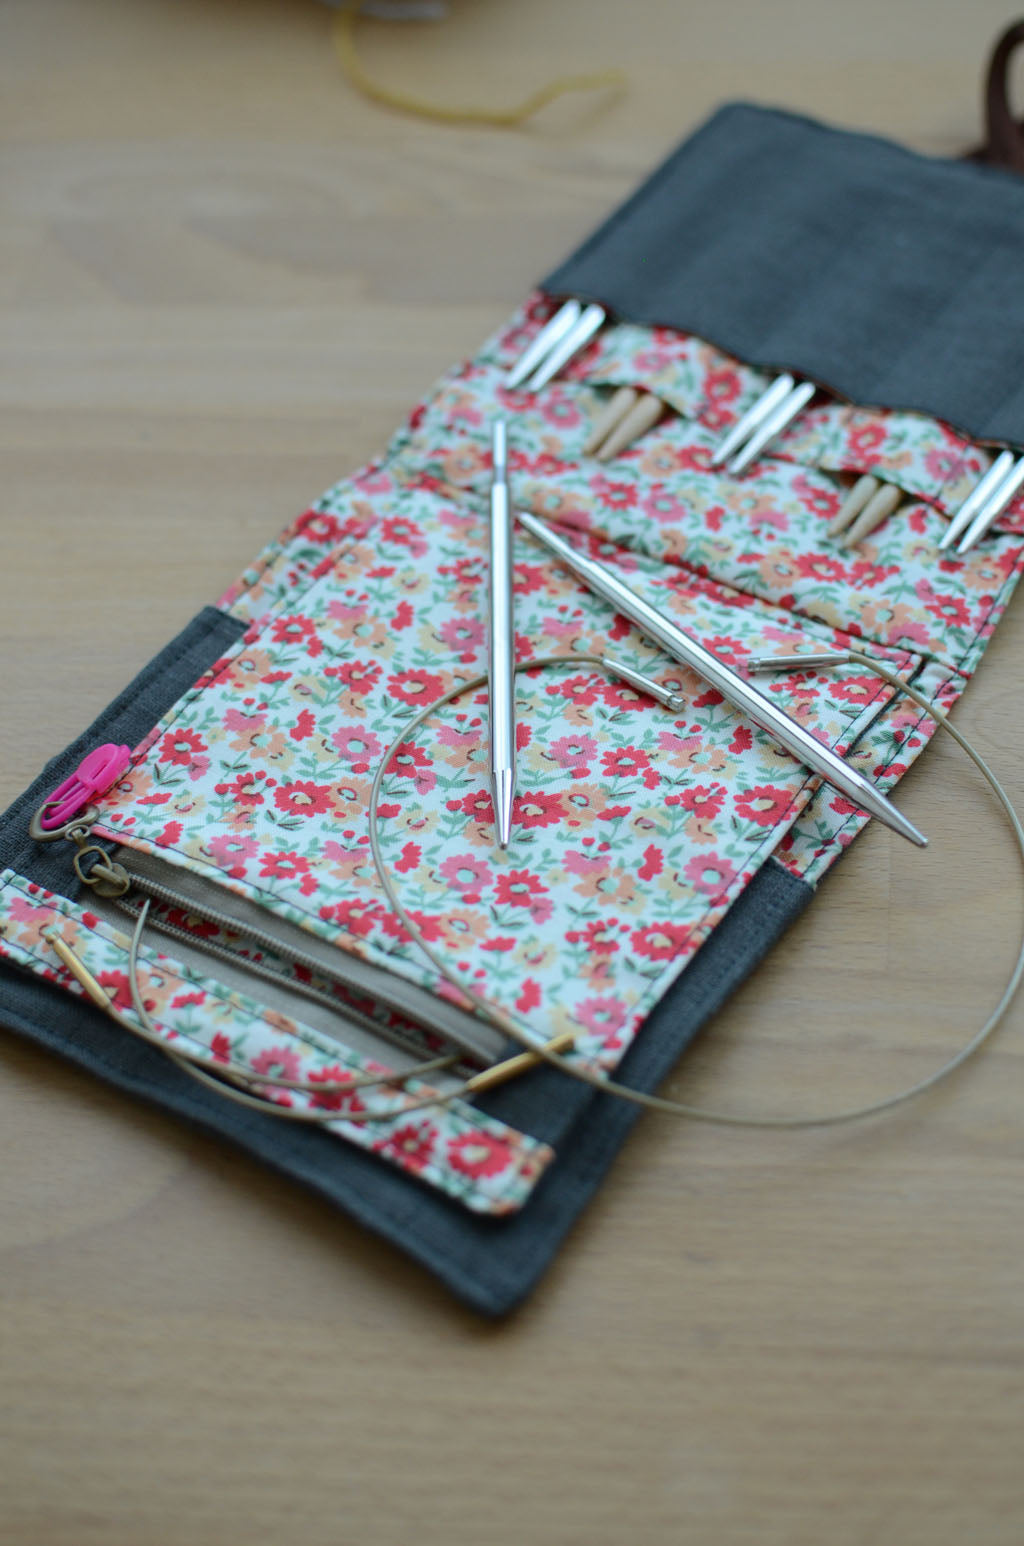 Travel knitting needle holder that carries all your knit necessities ...